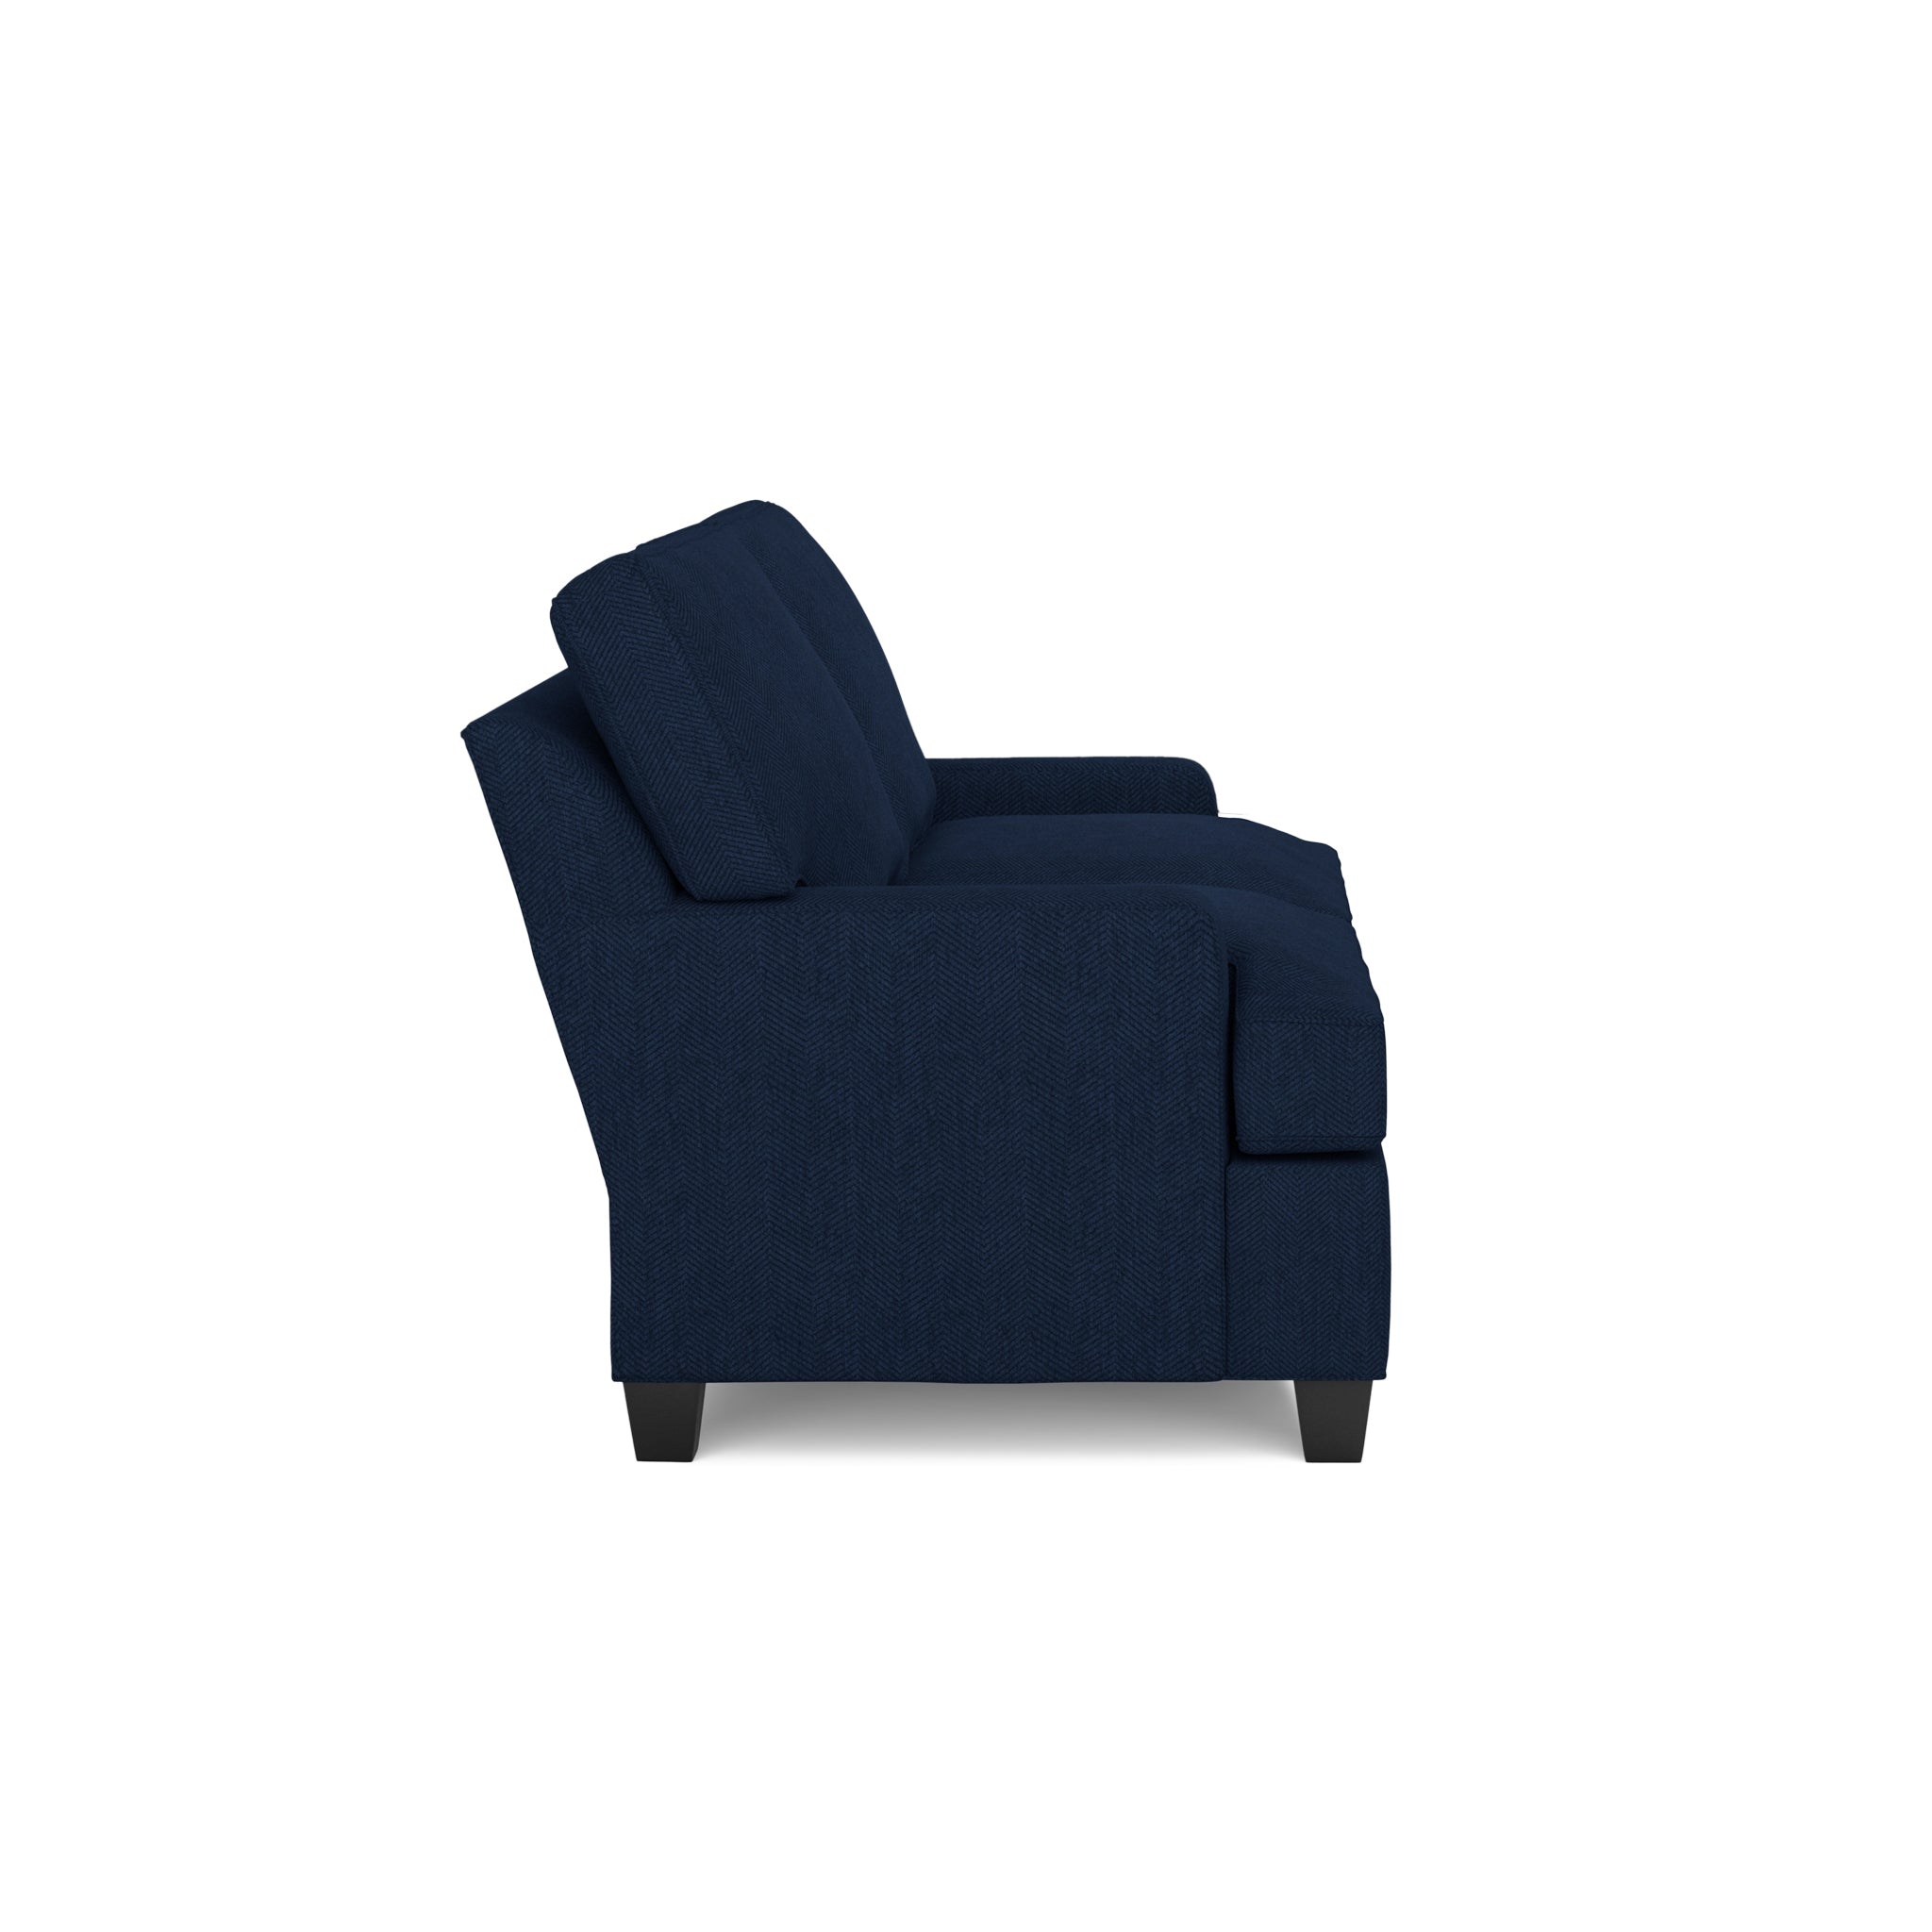 The Crag House Collection - Loveseat